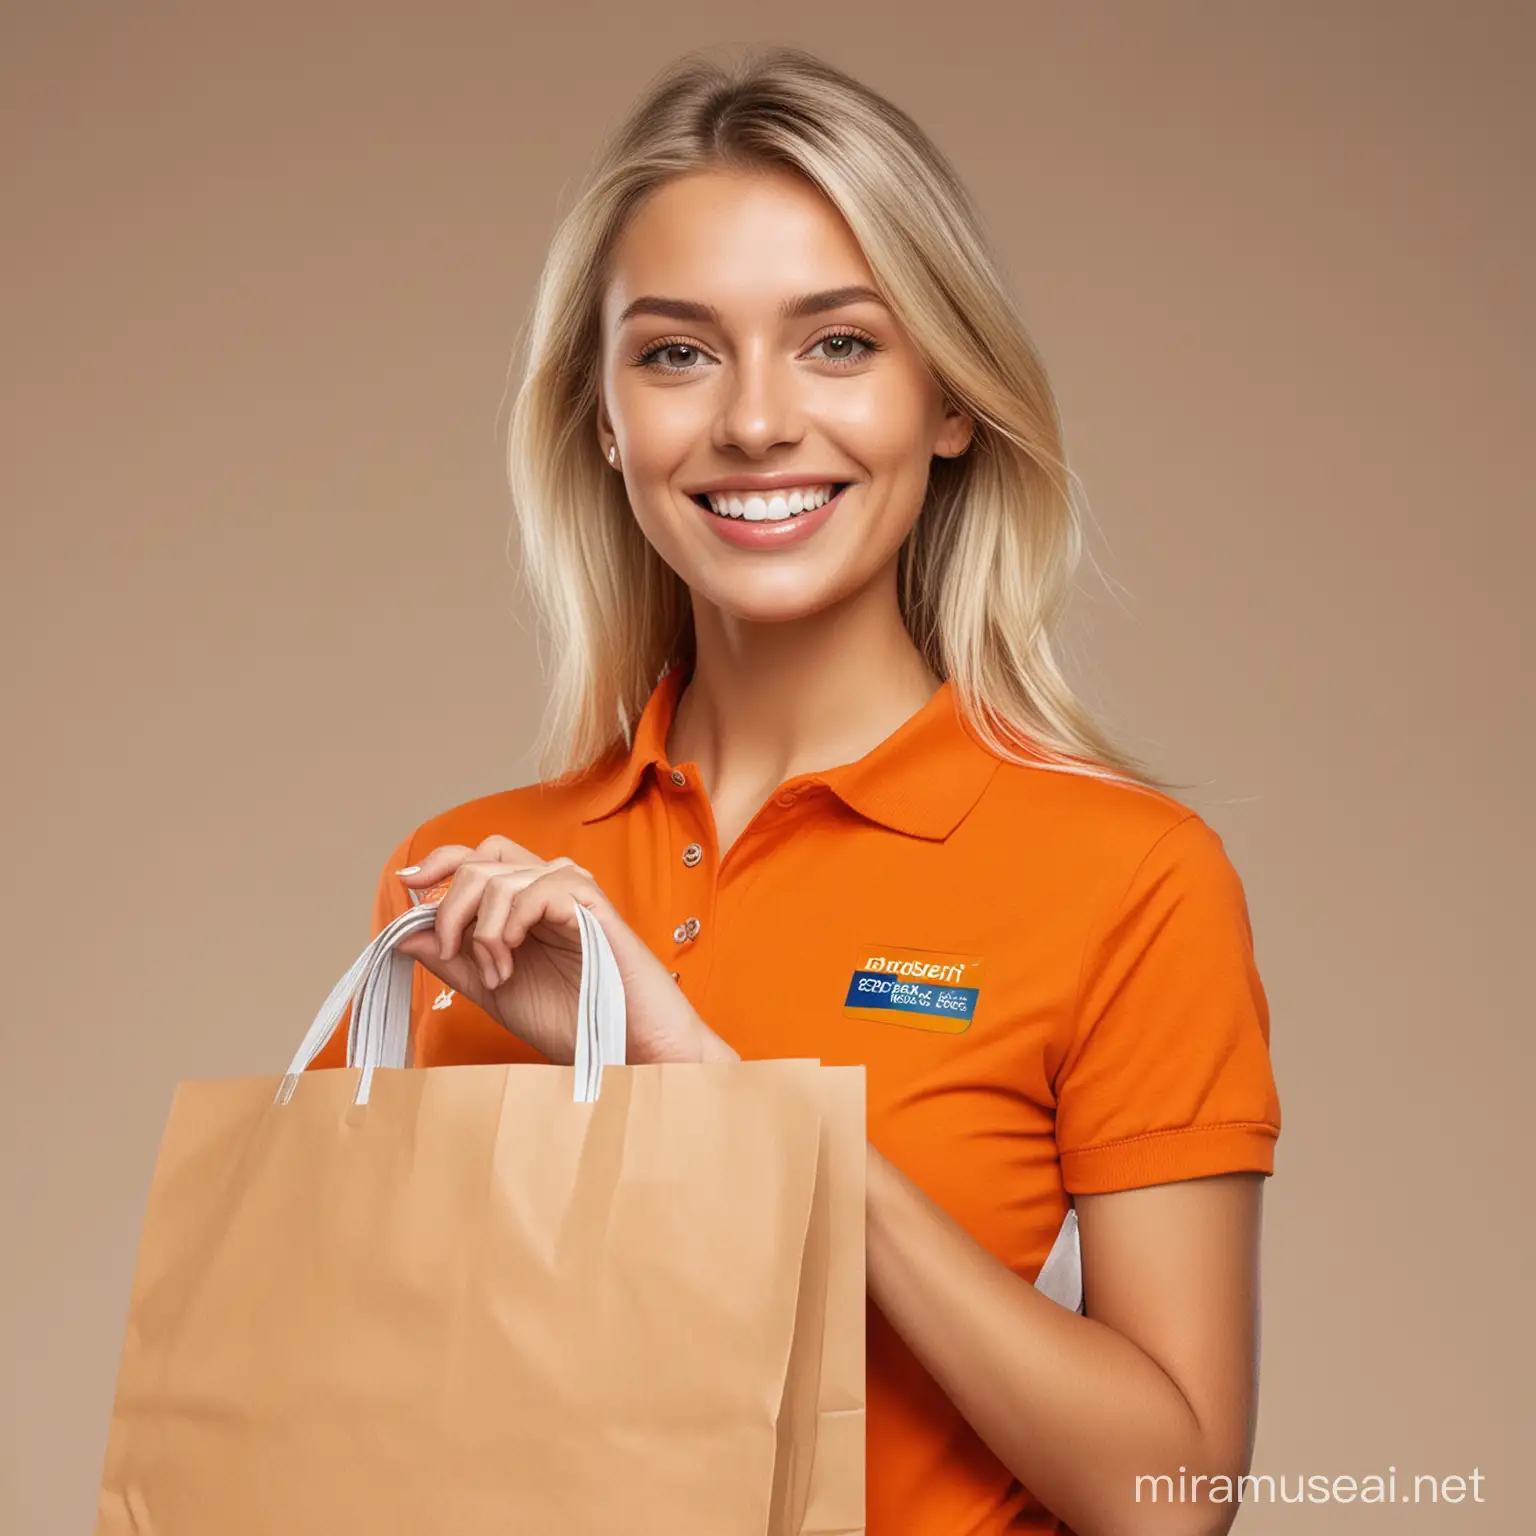 Smiling Blonde Model with Orange Polo Shirt Holding Shopping Bag and Credit Card